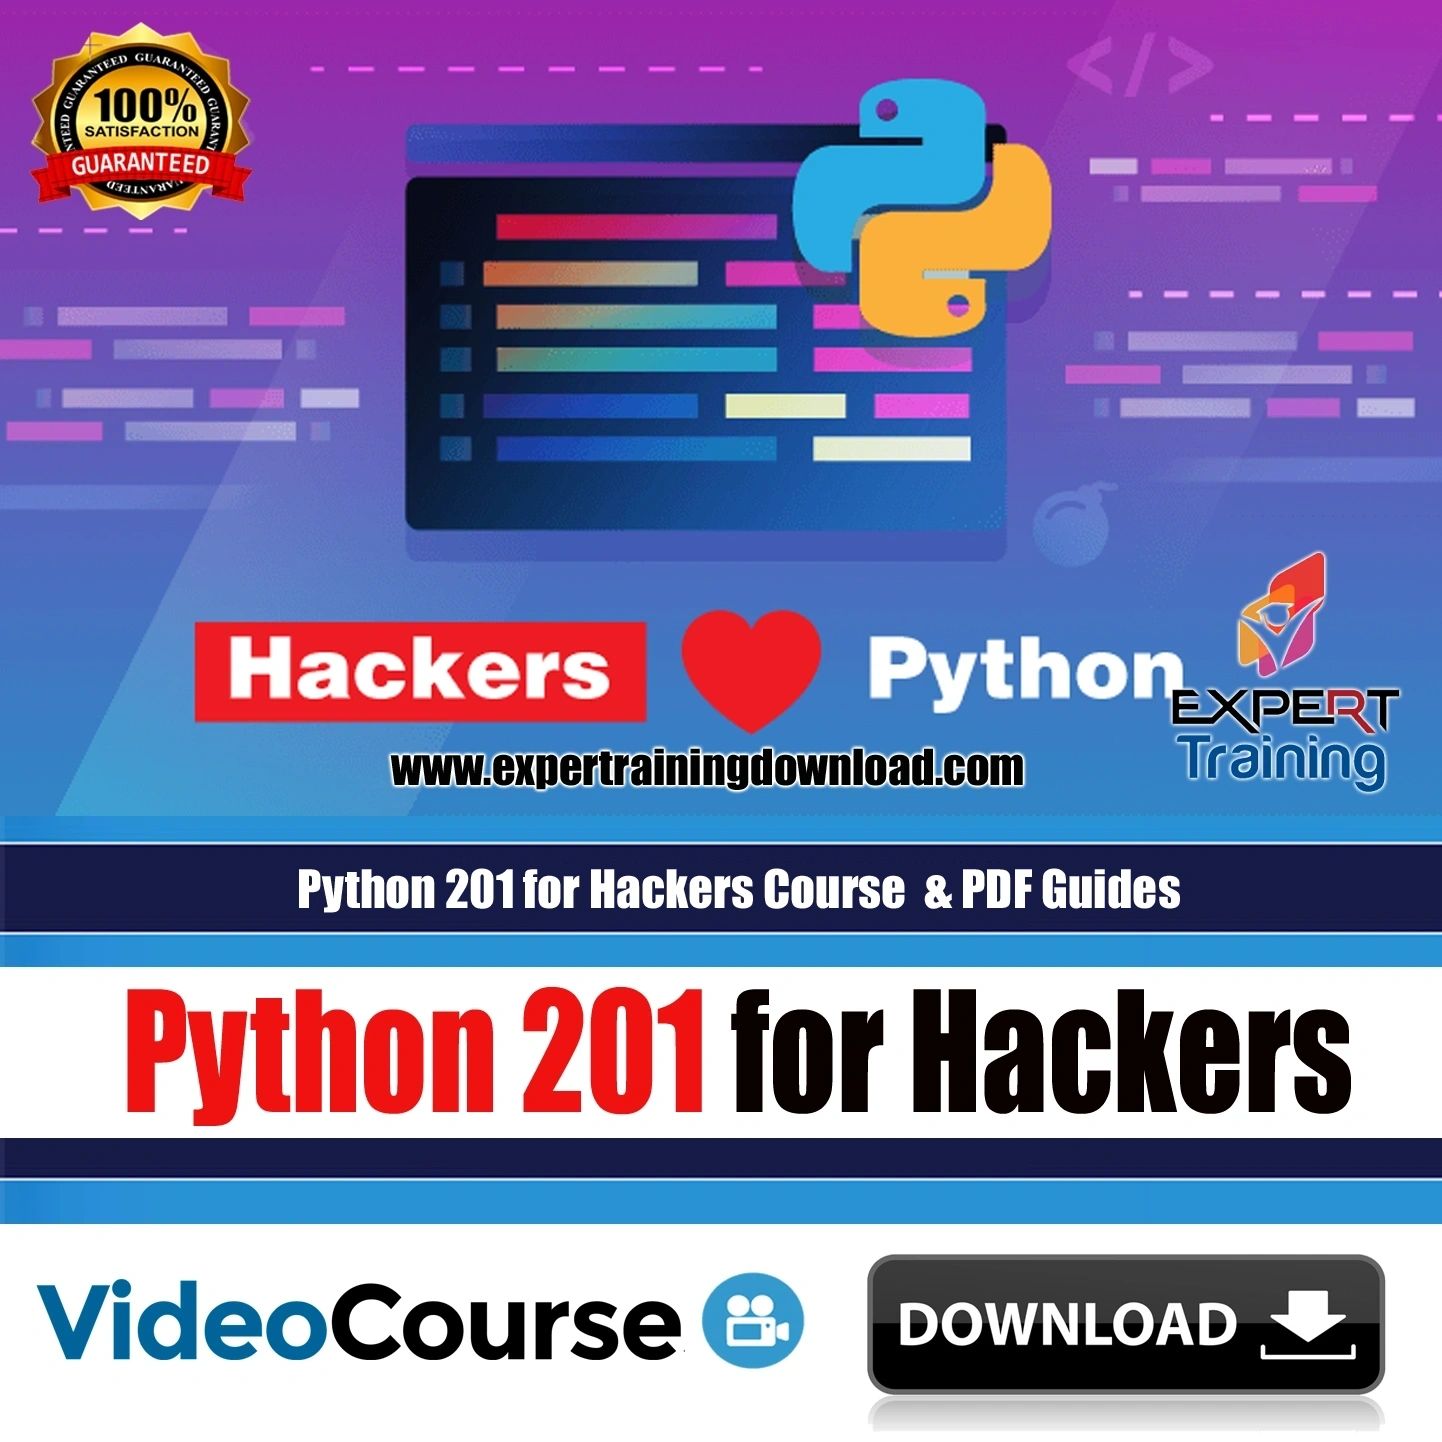 Python 201 for Hackers Course & PDF Guides